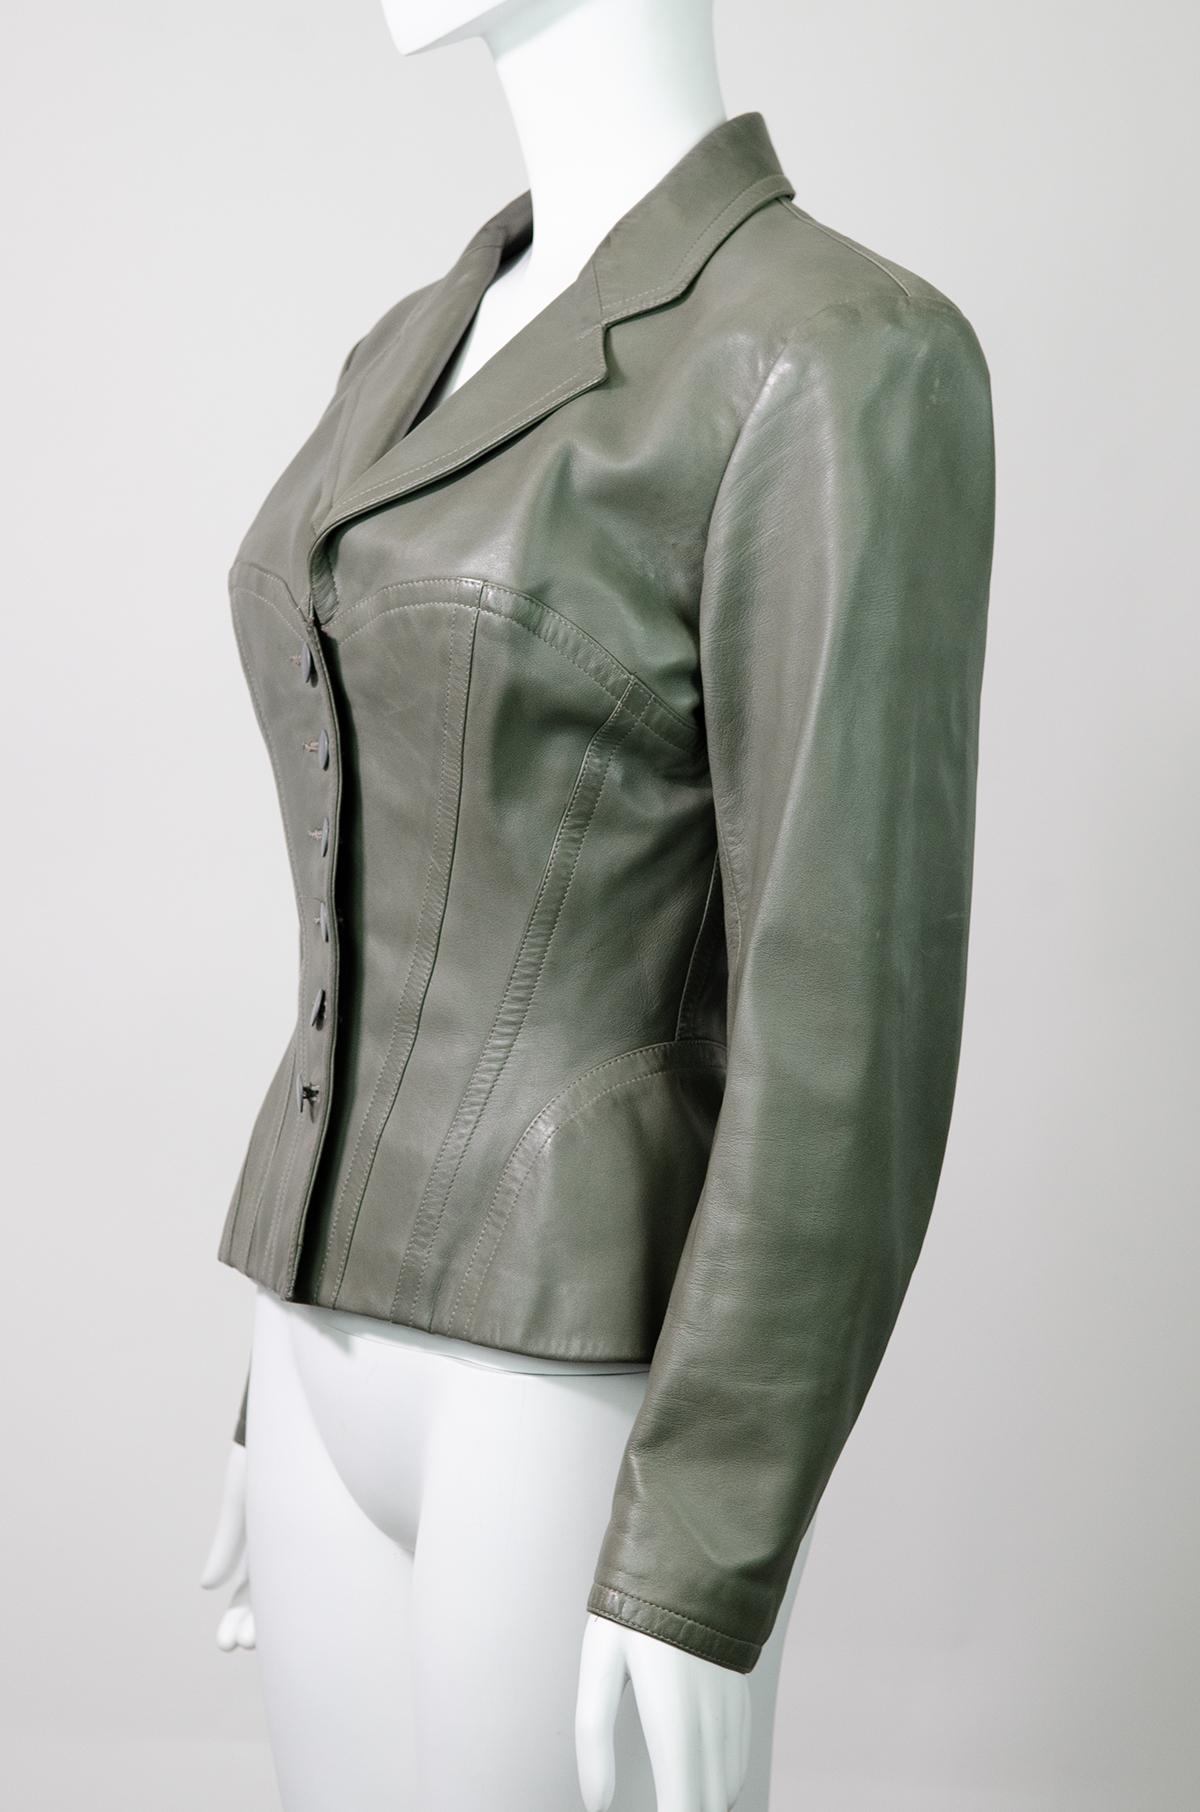 AZZEDINE ALAÏA FW 1987 Grey Runway Leather Corset Jacket  In Excellent Condition For Sale In Berlin, BE